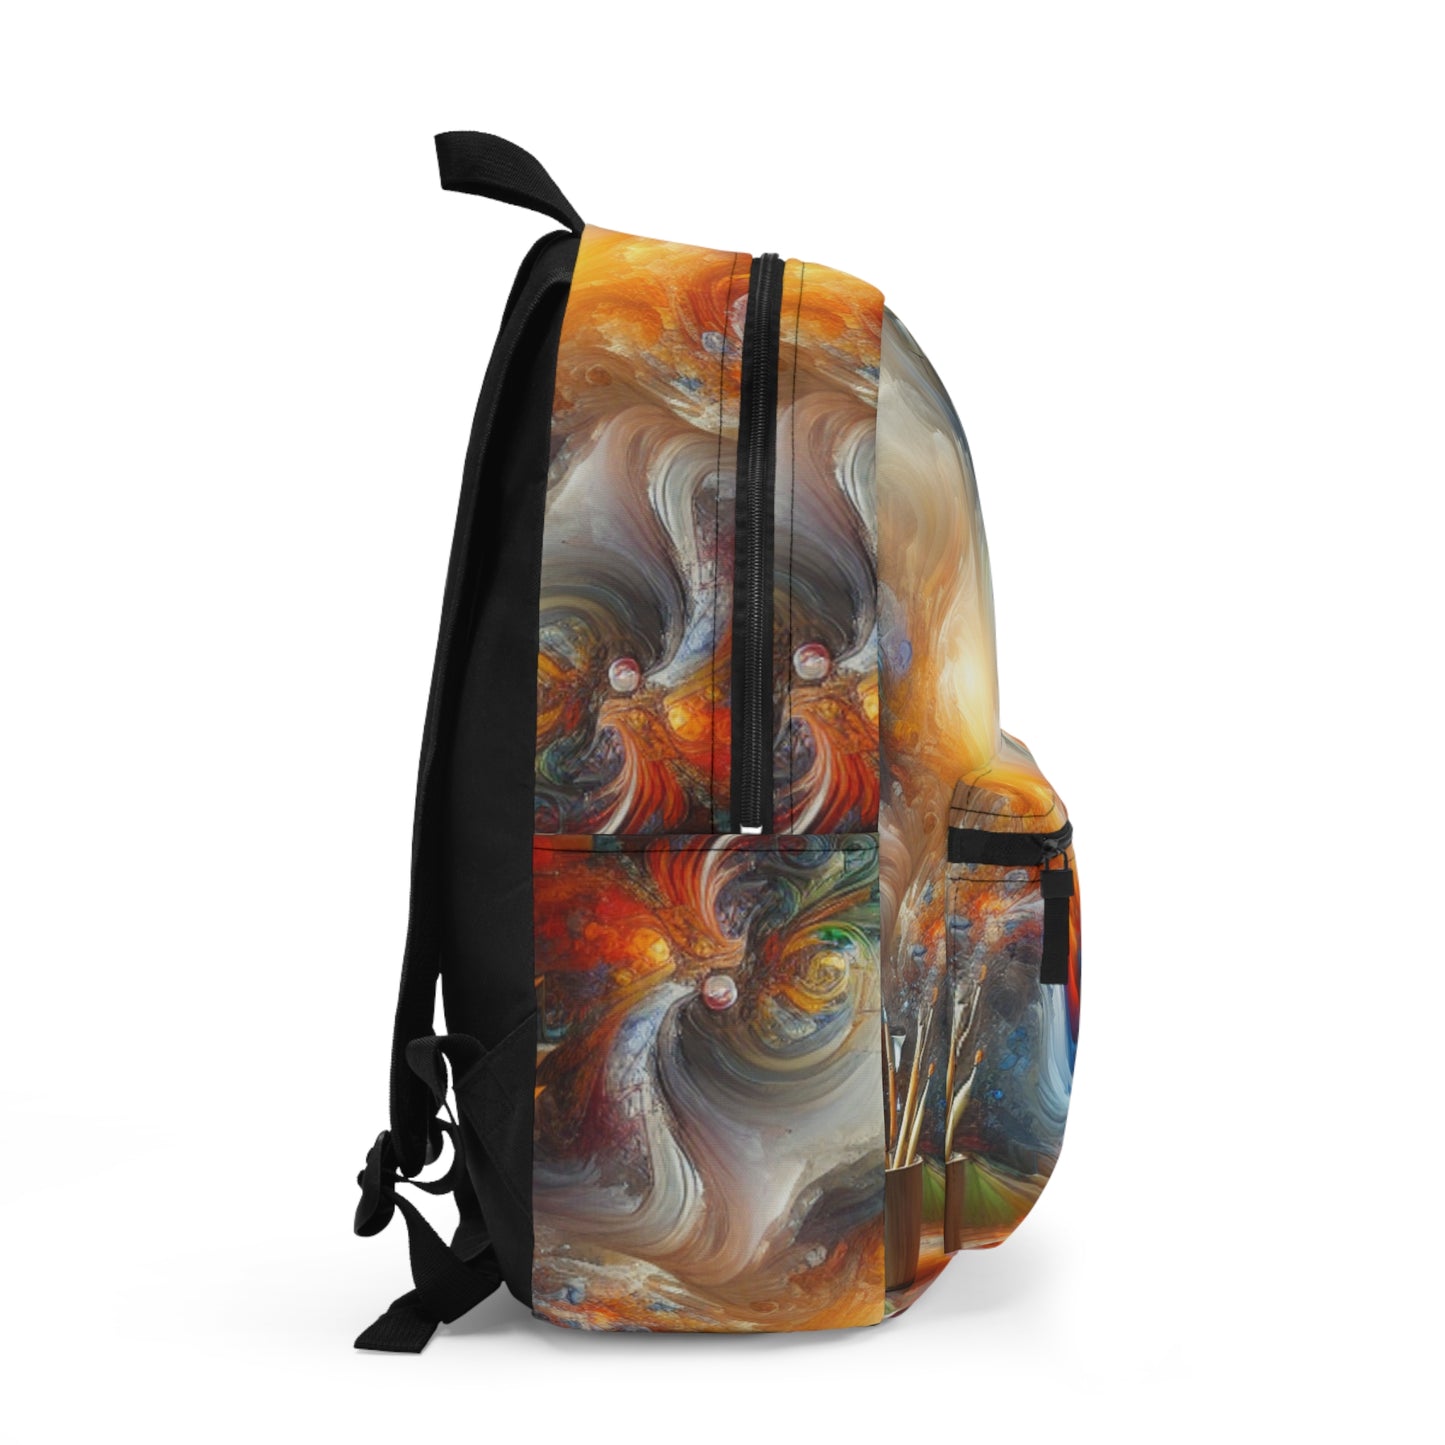 "Mystical Forest: A Whimsical Wonderland" - The Alien Backpack Digital Painting